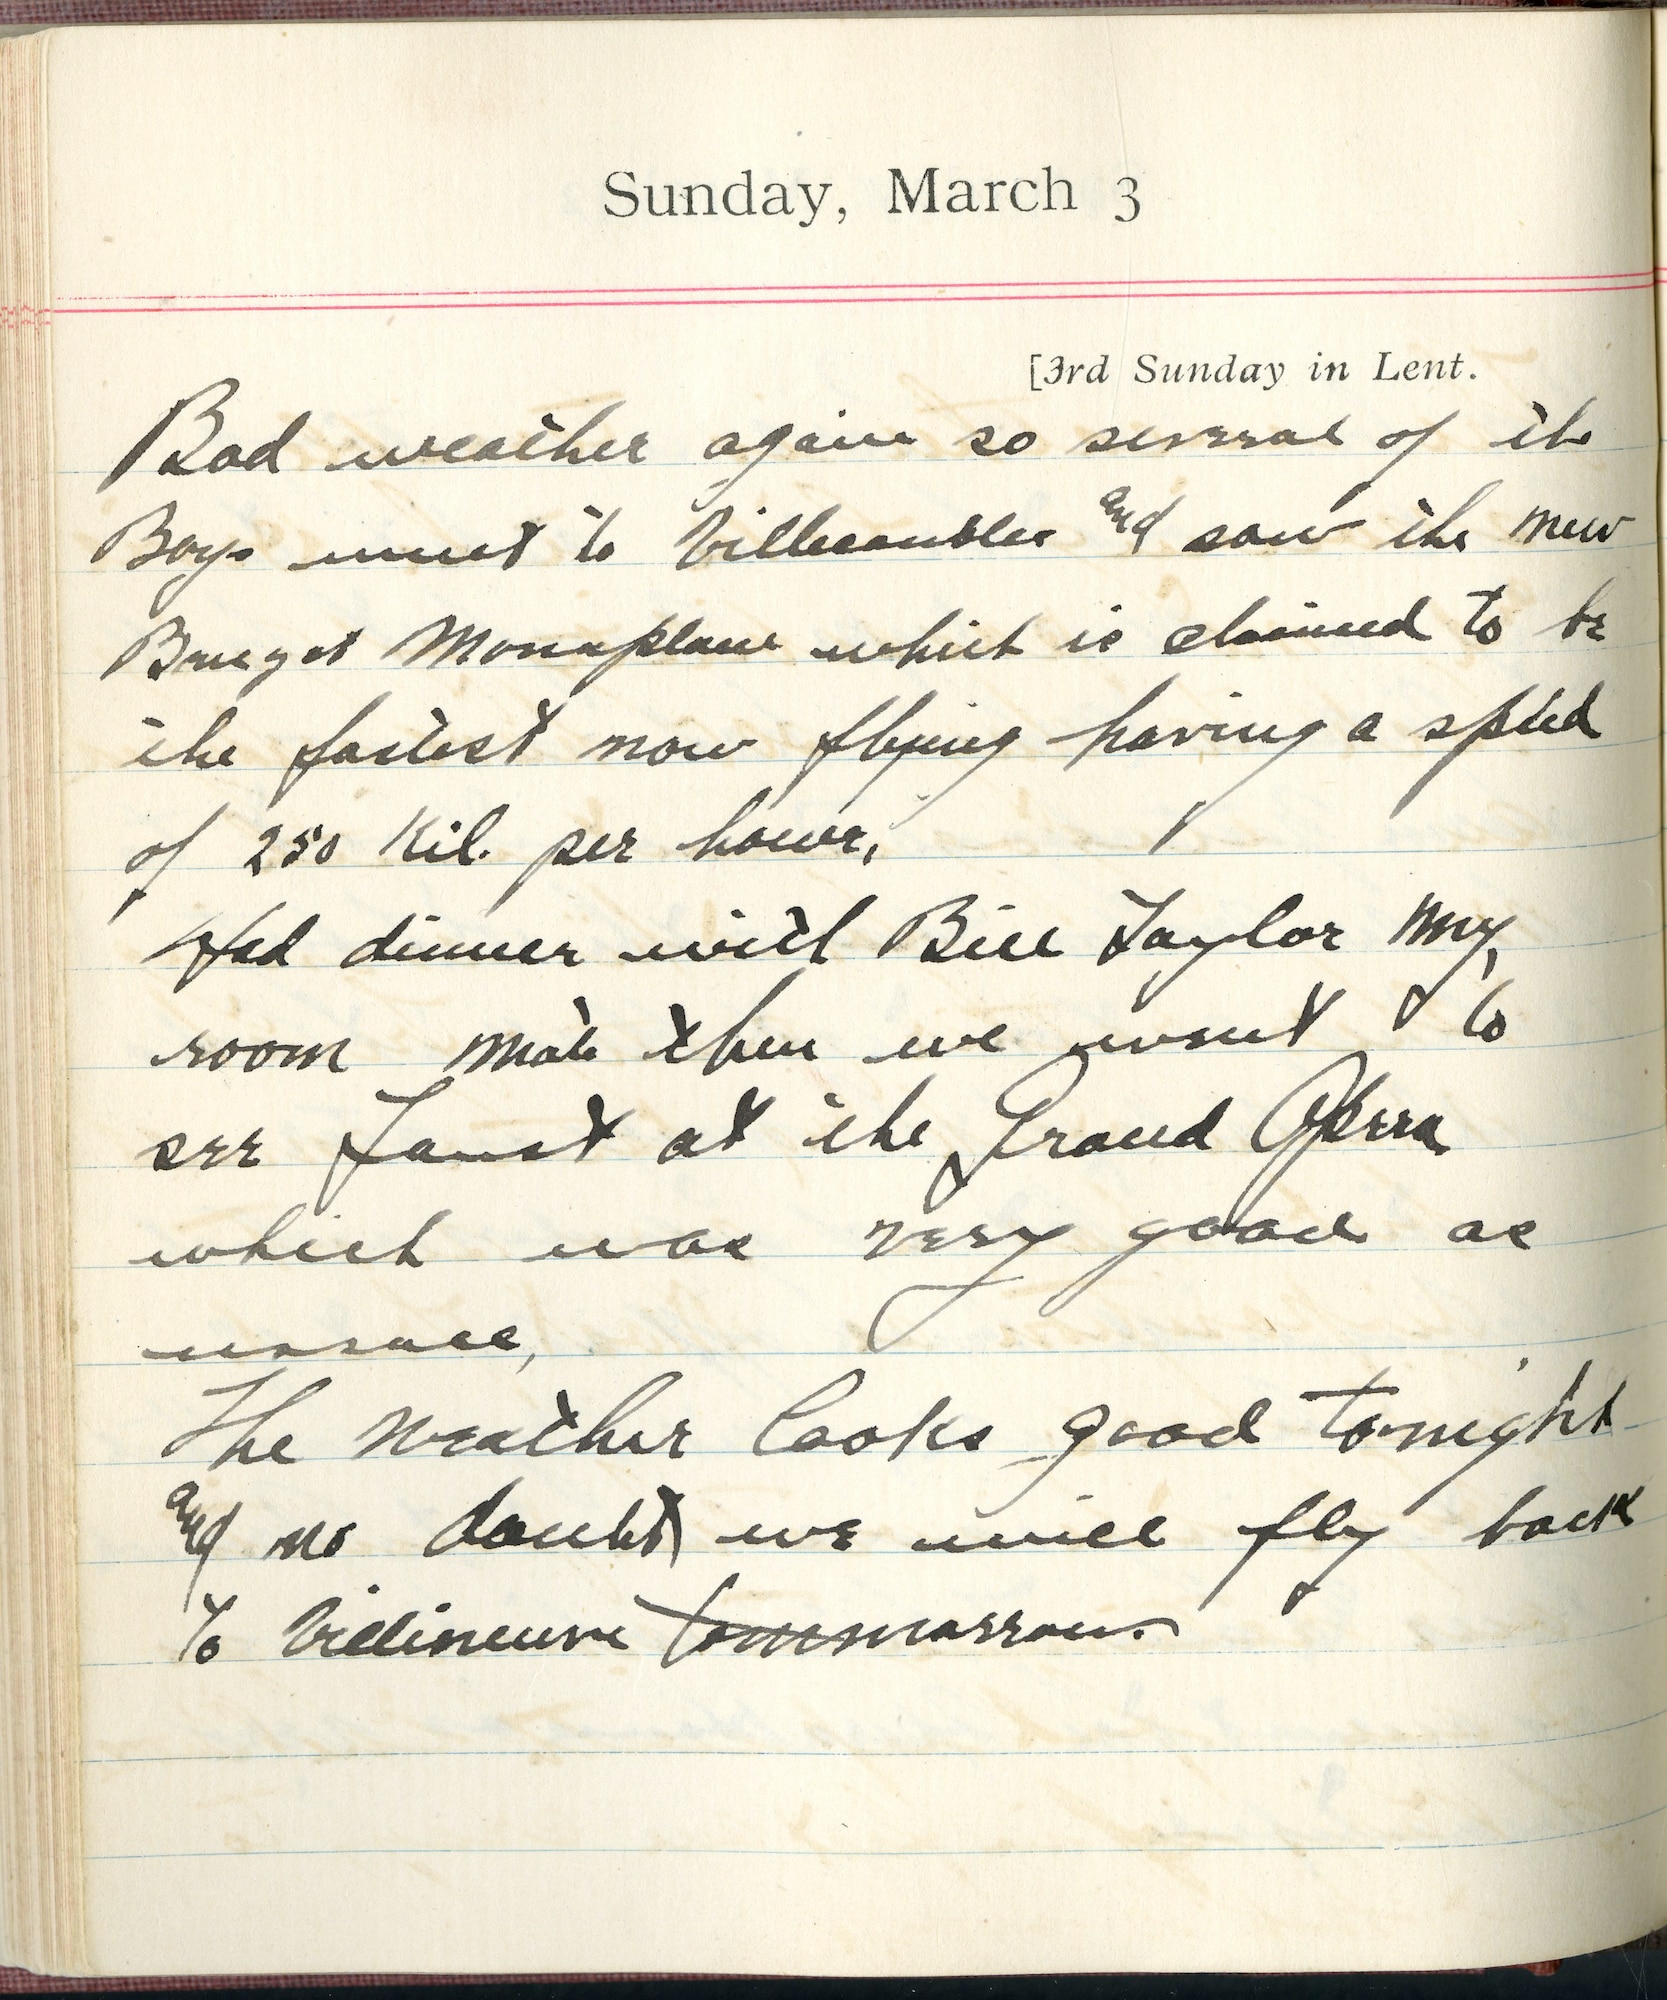 Capt. Edward V. Rickenbacker's 1918 wartime diary entry. (03/03/1918).

Bad weather again so several of the boys went to Villacoublay and saw the new Breguet monoplane, which is claimed to be the fastest new flying, having a speed of 250 kil. per hour.

Had dinner with Bill [Lt. William] Taylor my roommate.  Then we went to see Faust at the Grand Opera which was very good as [illegible].

The weather looks good tonight and no doubt we will fly back to Villeneuve tomorrow.